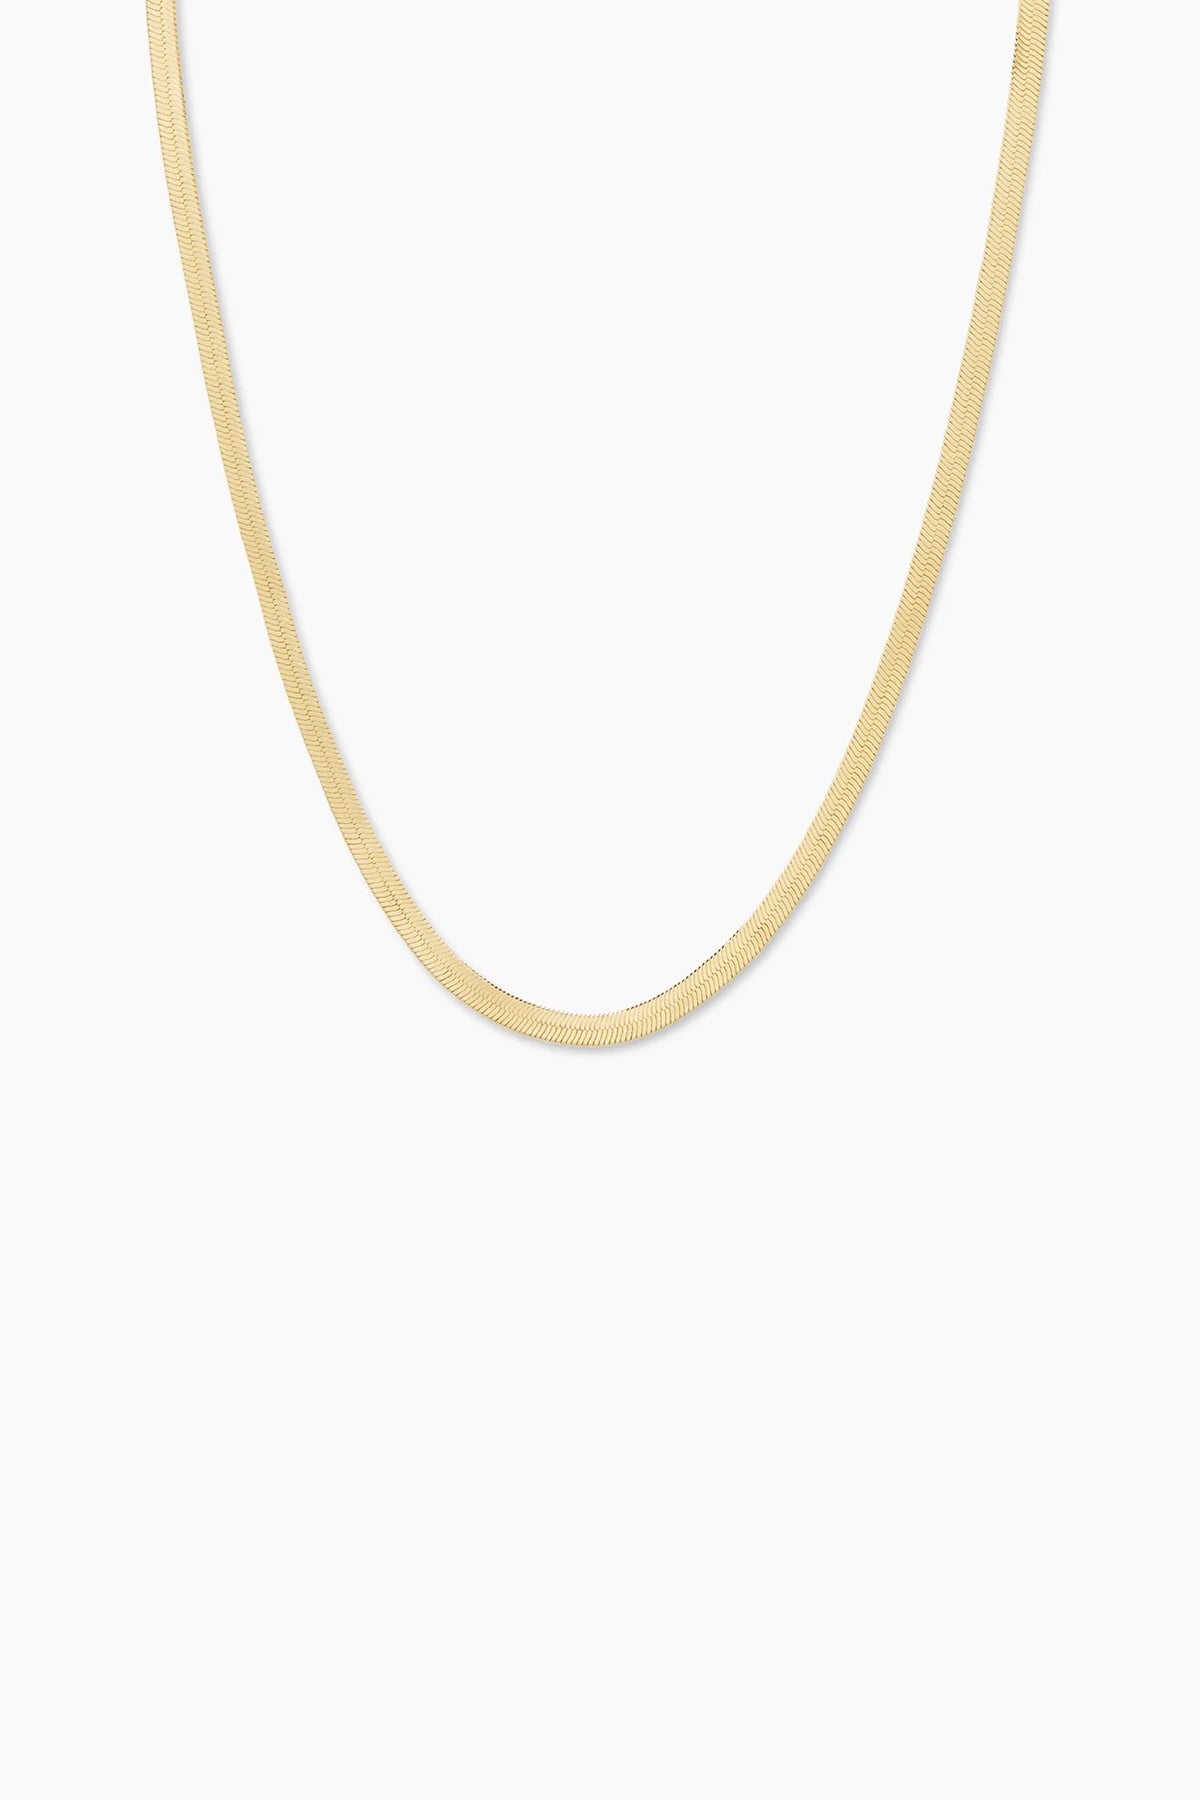 Women' Business Venice Necklace - Gold NORA GARDNER | OFFICIAL STORE for work and office